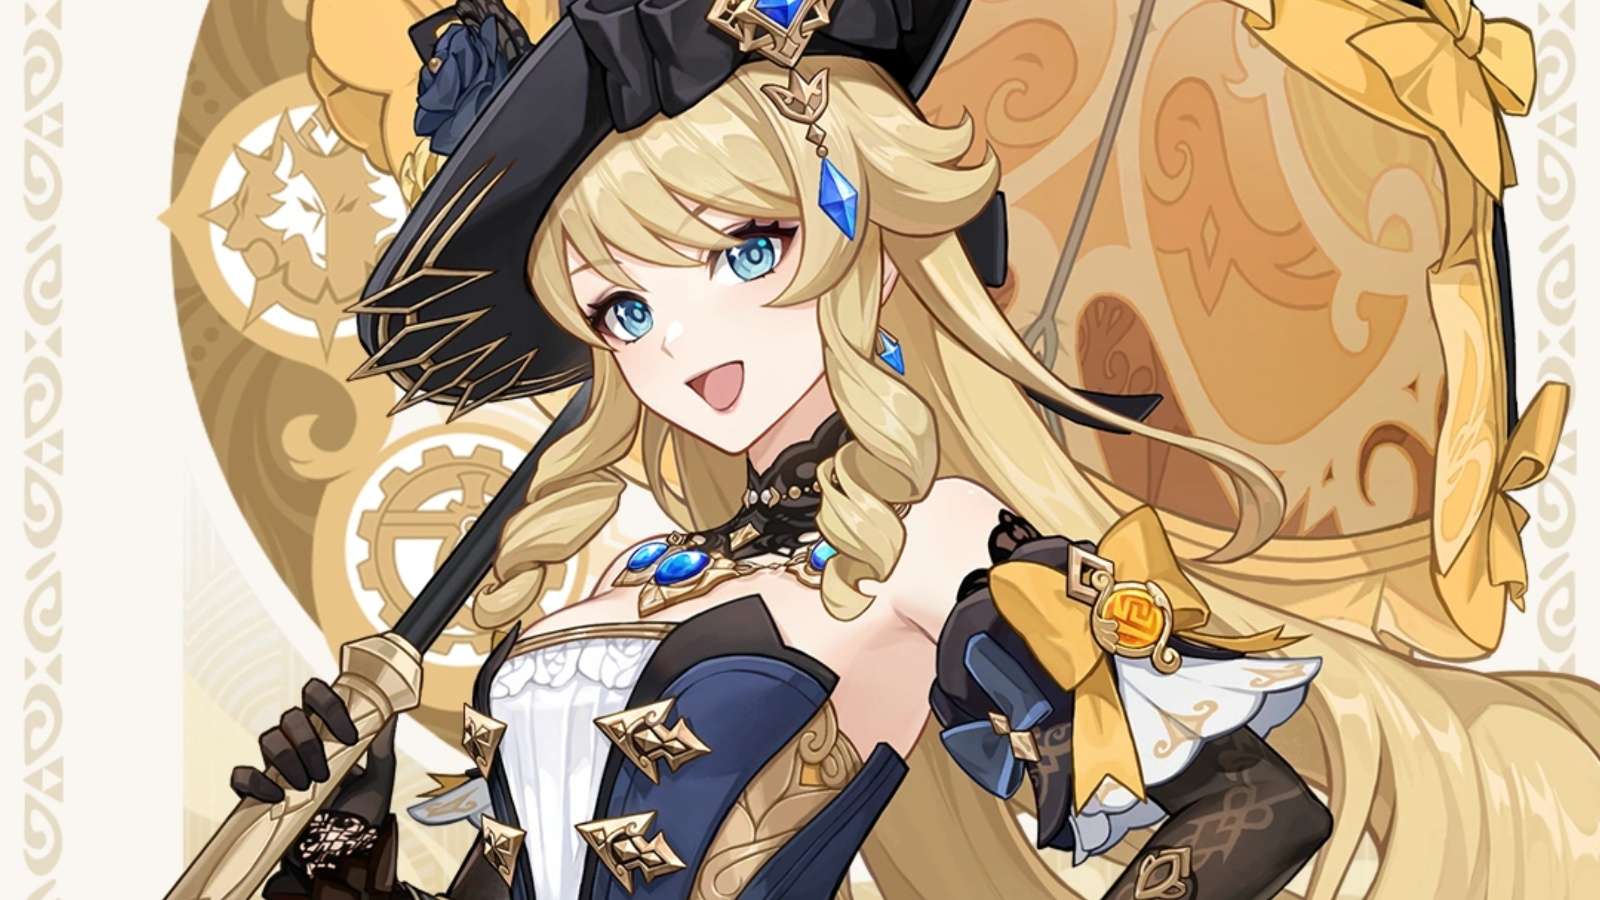 An image of Navia from her card